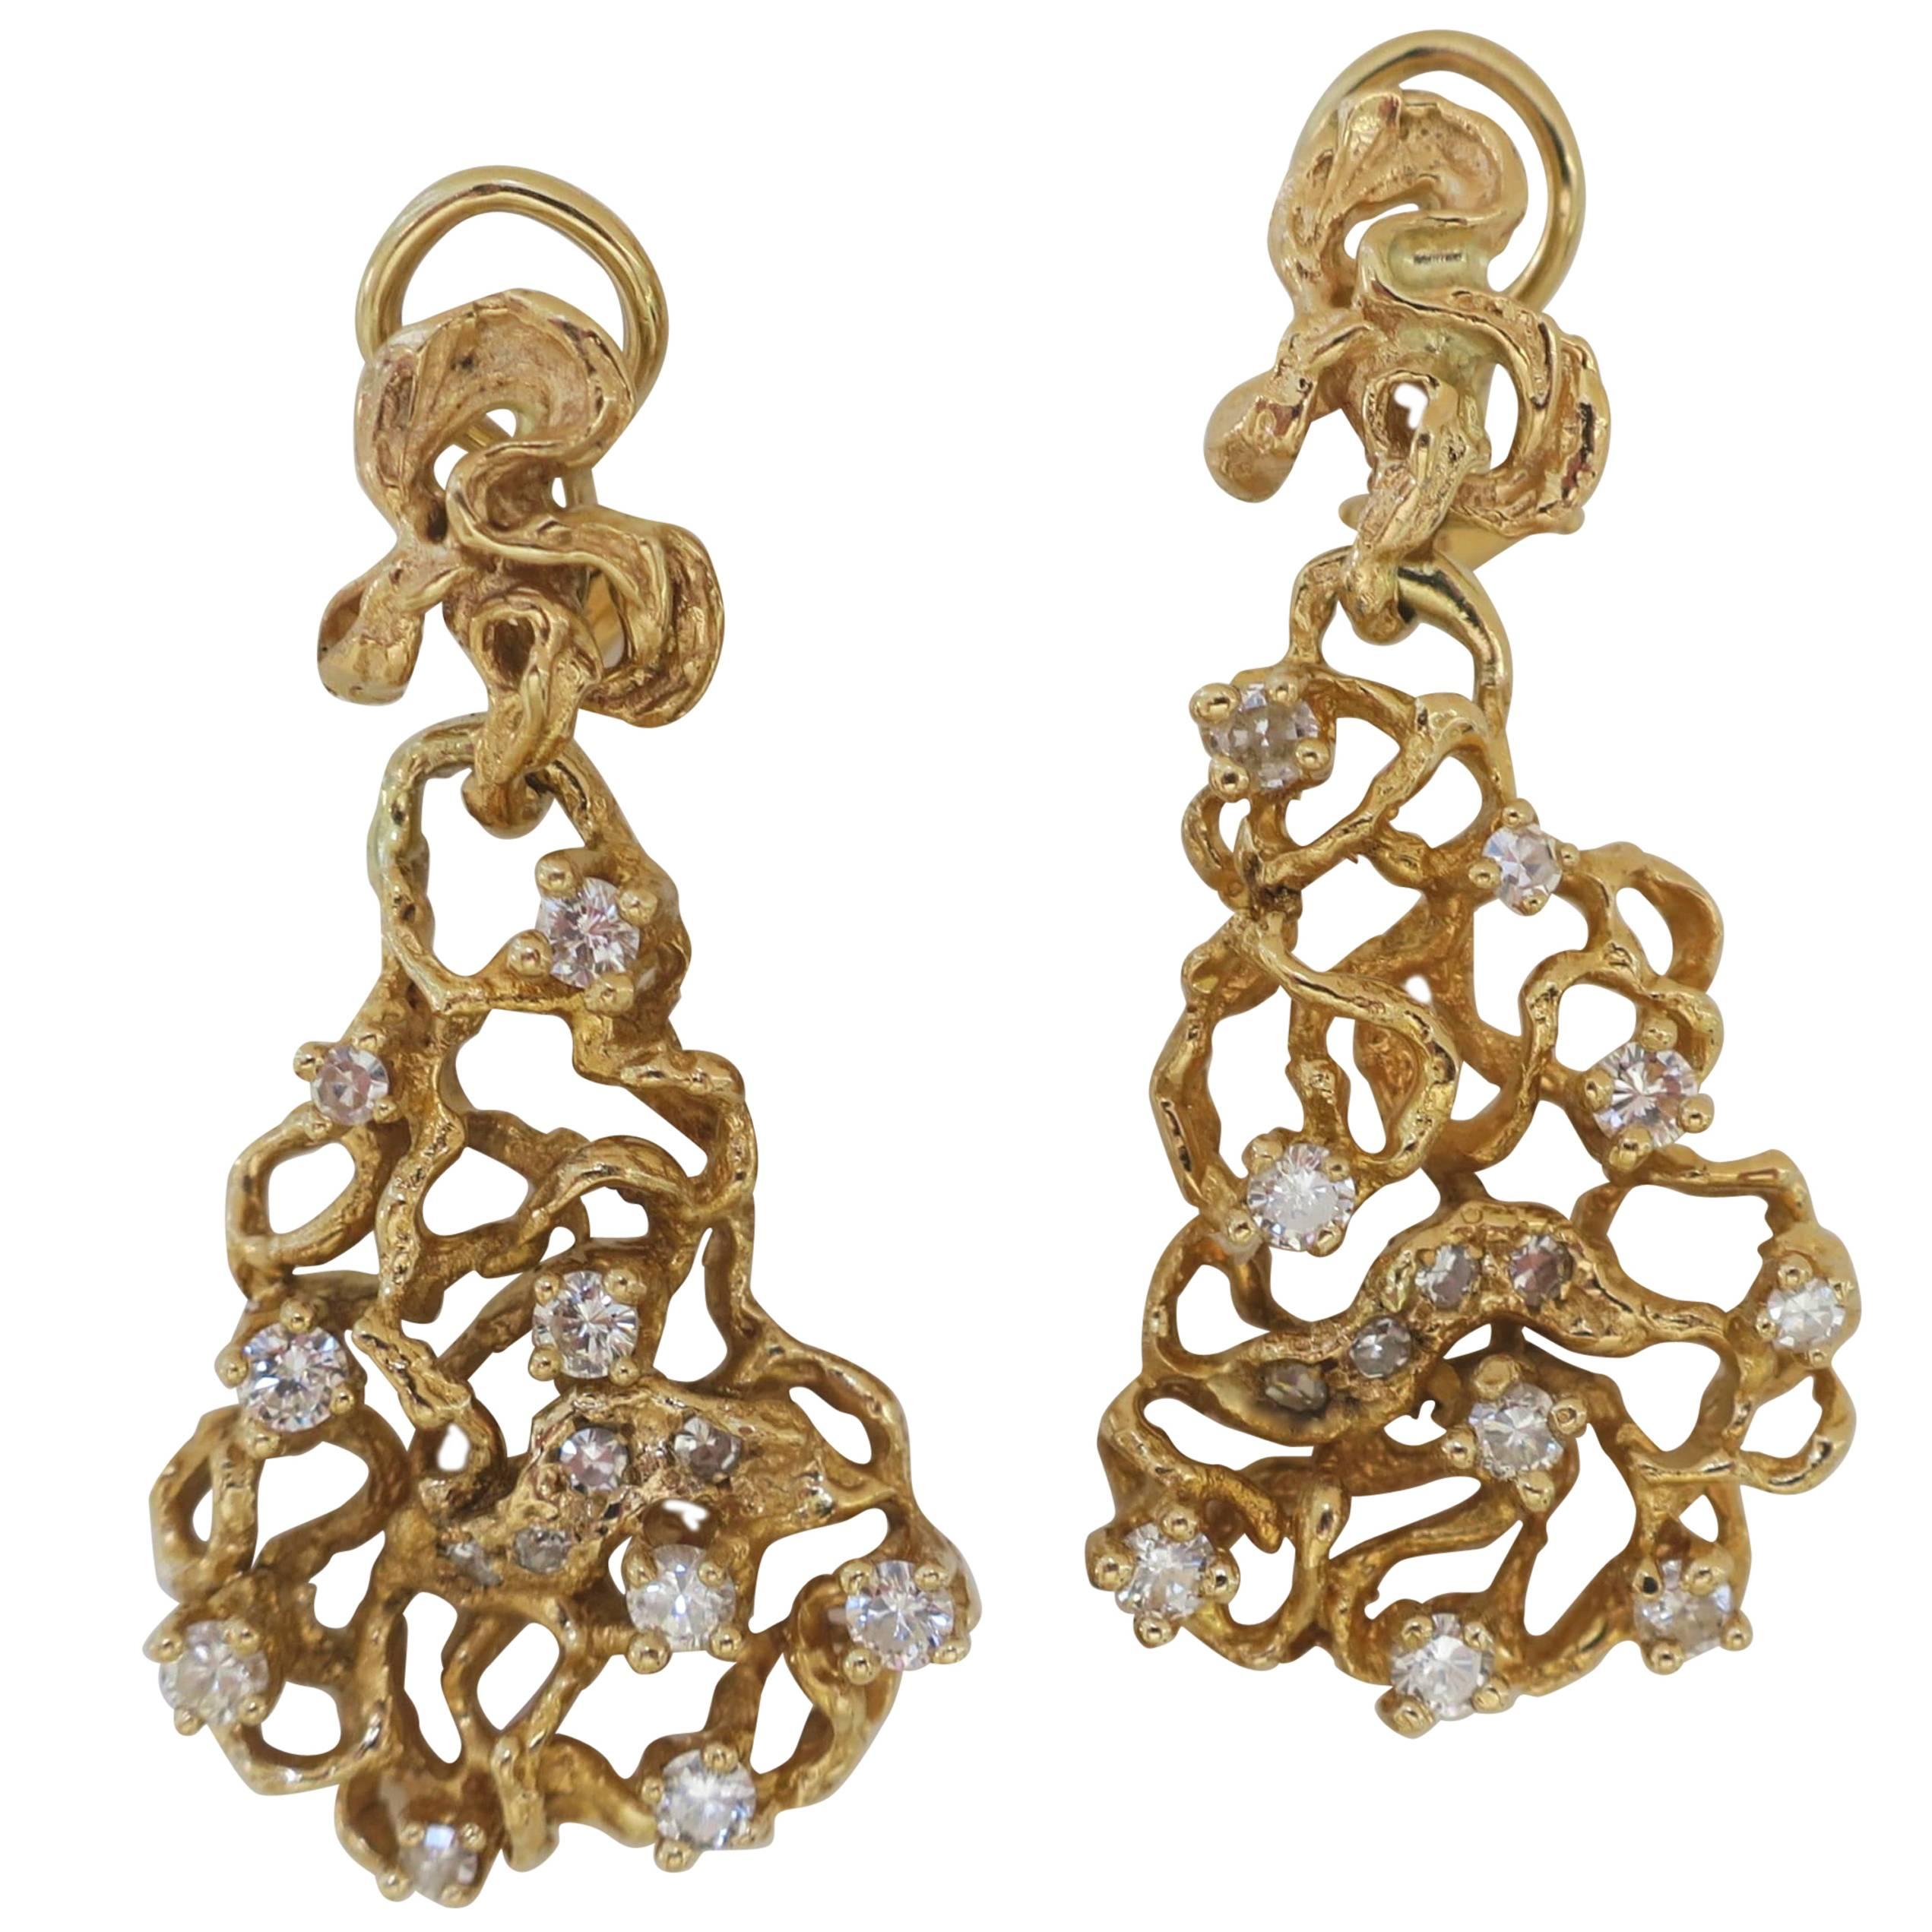 Free-Form Gold and Diamond Dangle Earrings, 1970s